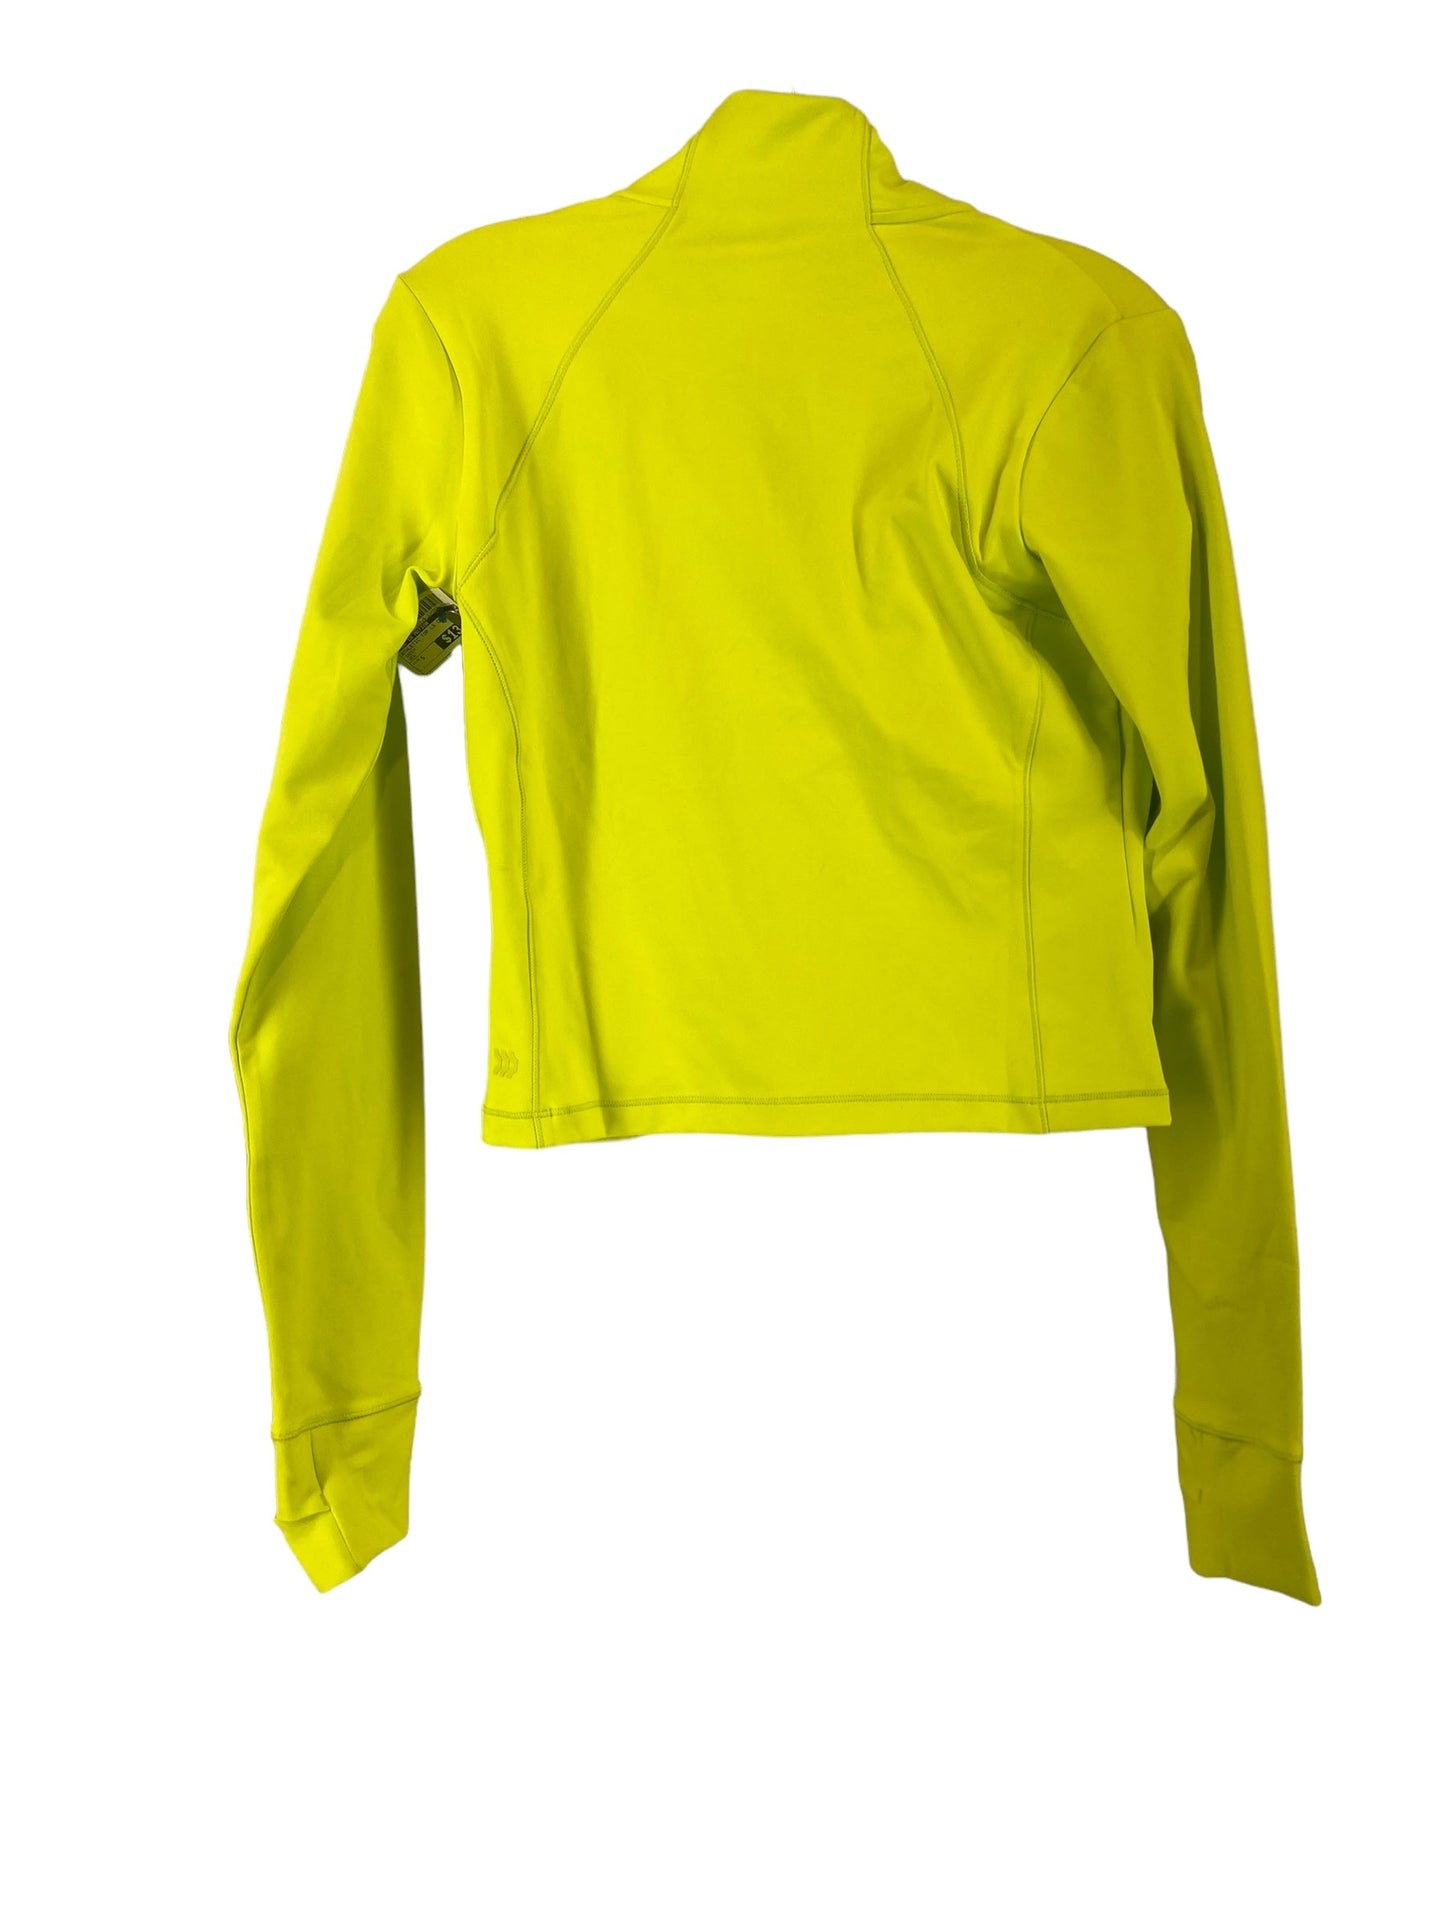 Green Athletic Top Long Sleeve Collar All In Motion, Size S